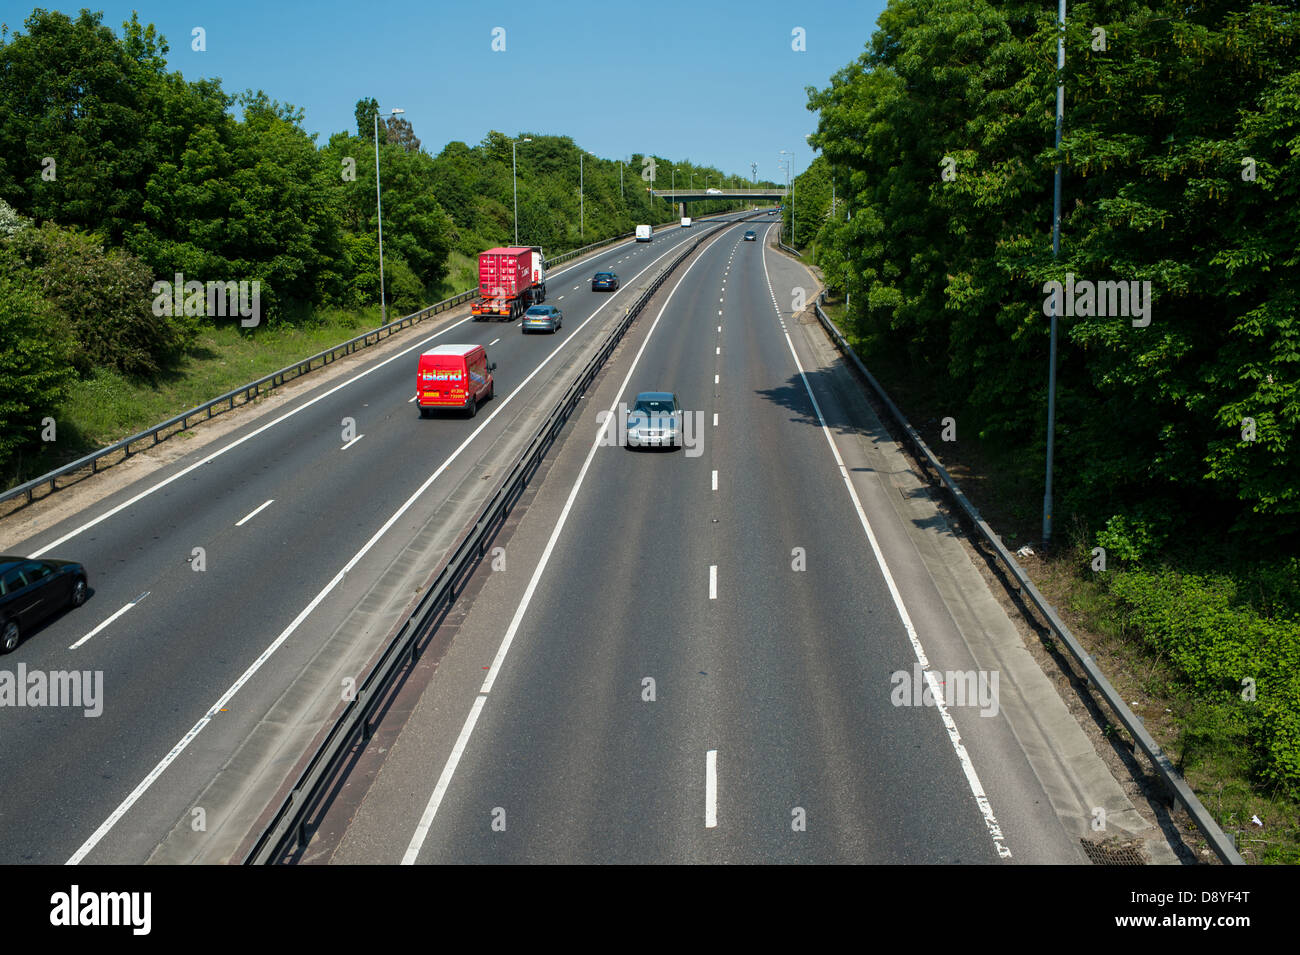 A12 Essex, UK. Vehicles using the outside lane on dual carriageway when no traffic is in nearside lane. Stock Photo